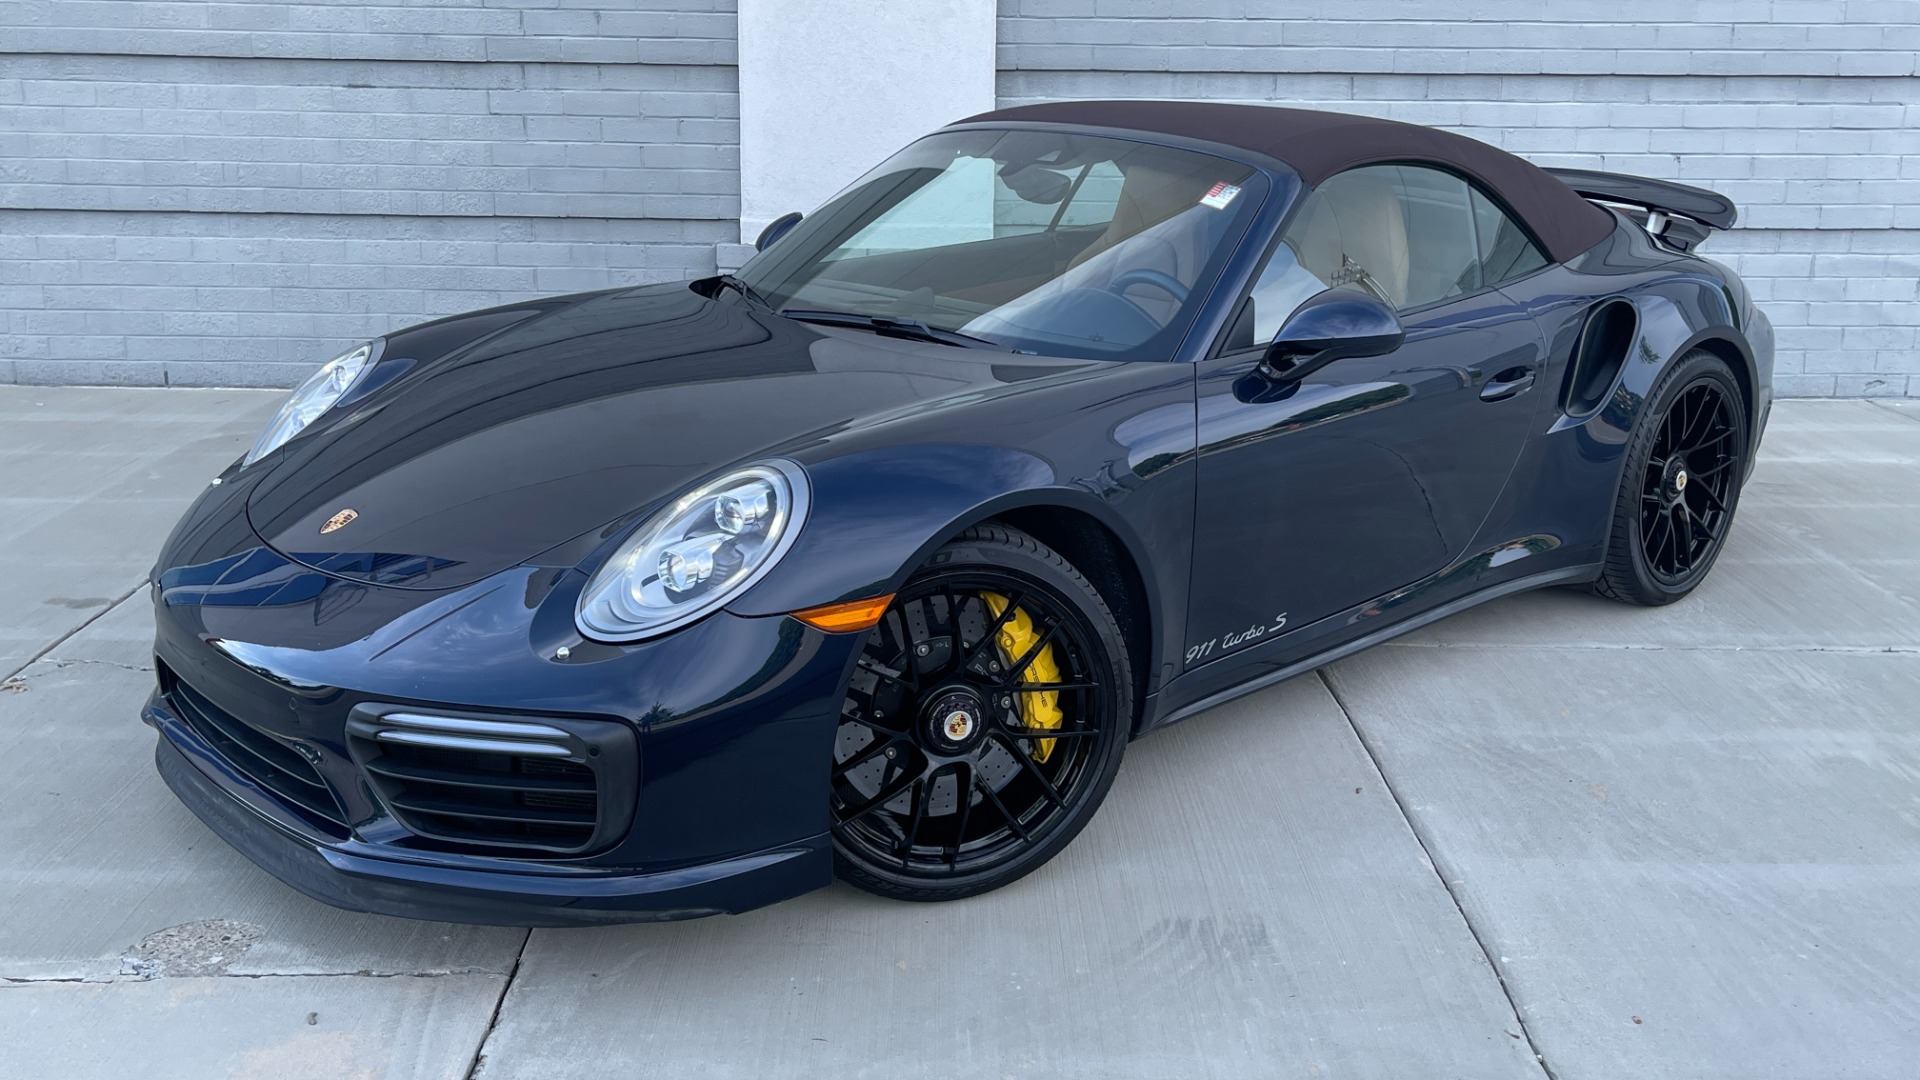 Used 2017 Porsche 911 Turbo S / CABRIOLET / FRONT LIFT / PDK / 20IN WHEELS for sale $179,999 at Formula Imports in Charlotte NC 28227 3